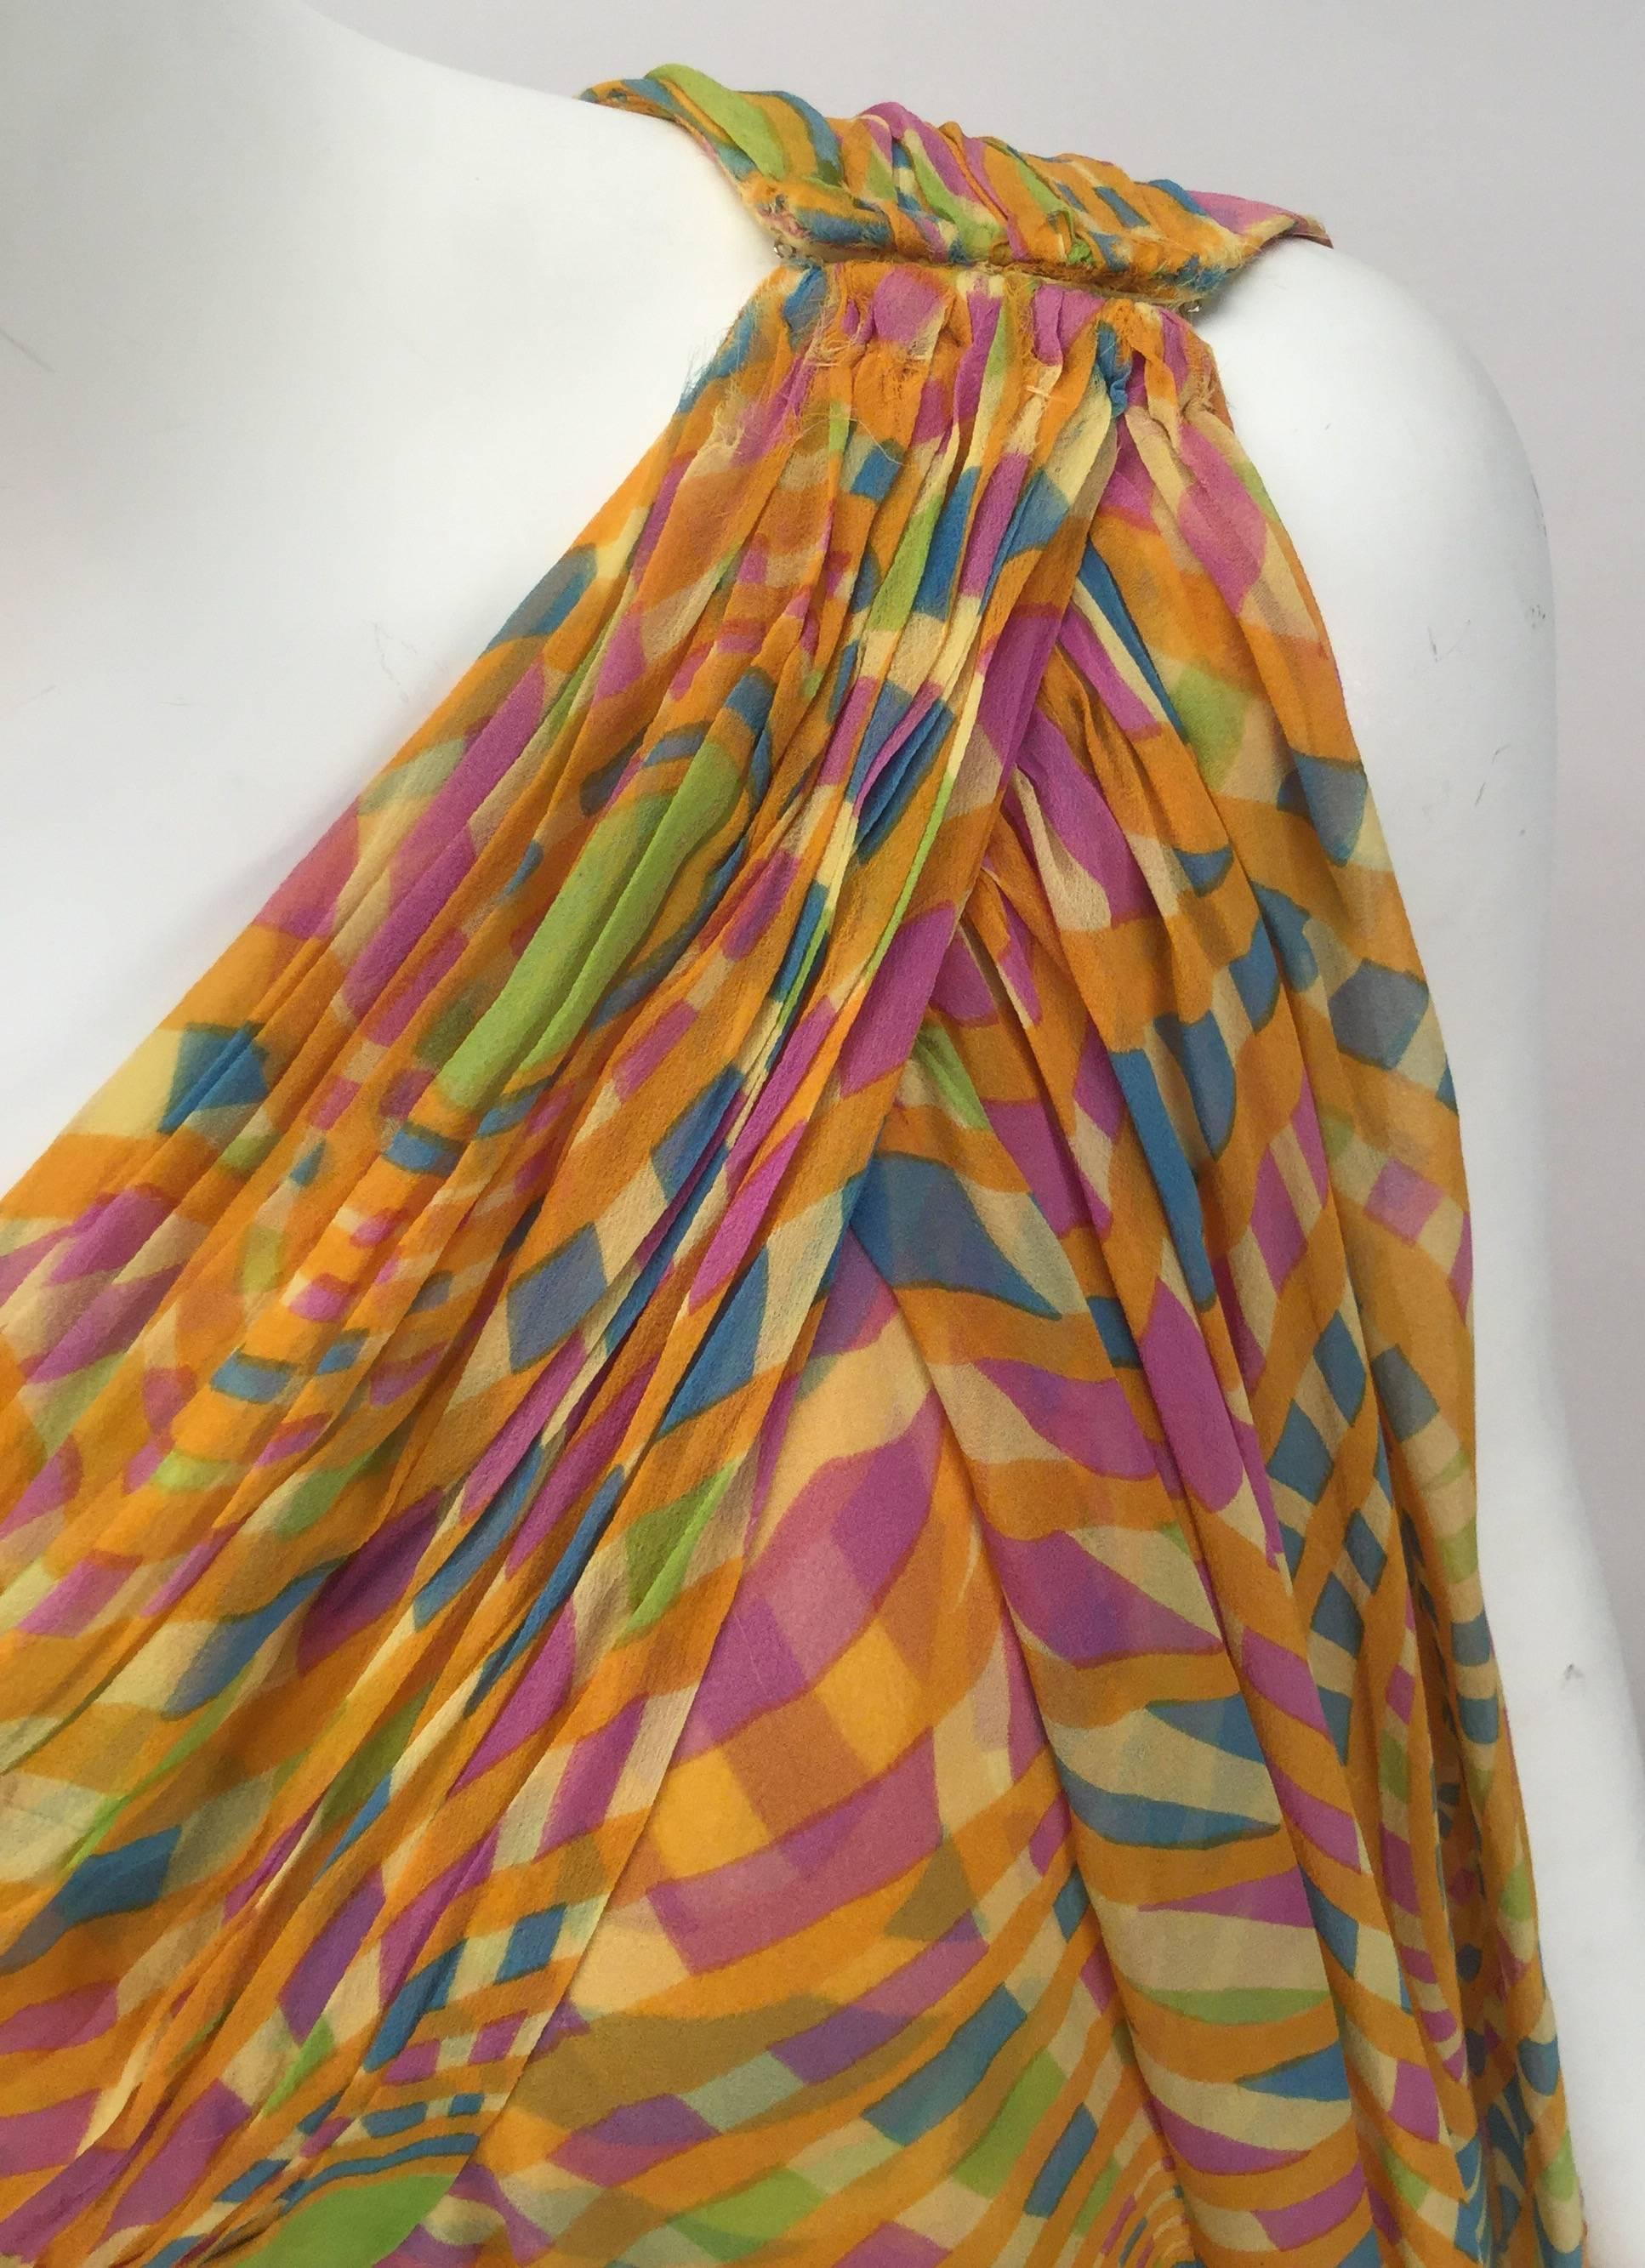 Sheer and flowing 1970s dress by Malcolm Starr.  Perfect for summer or any time of year resort or lounge wear. Fabric is yellow with green, pink and blue spiral prints on sheer silk Crepe de Chine. One shoulder dress with five hook and eye closures.